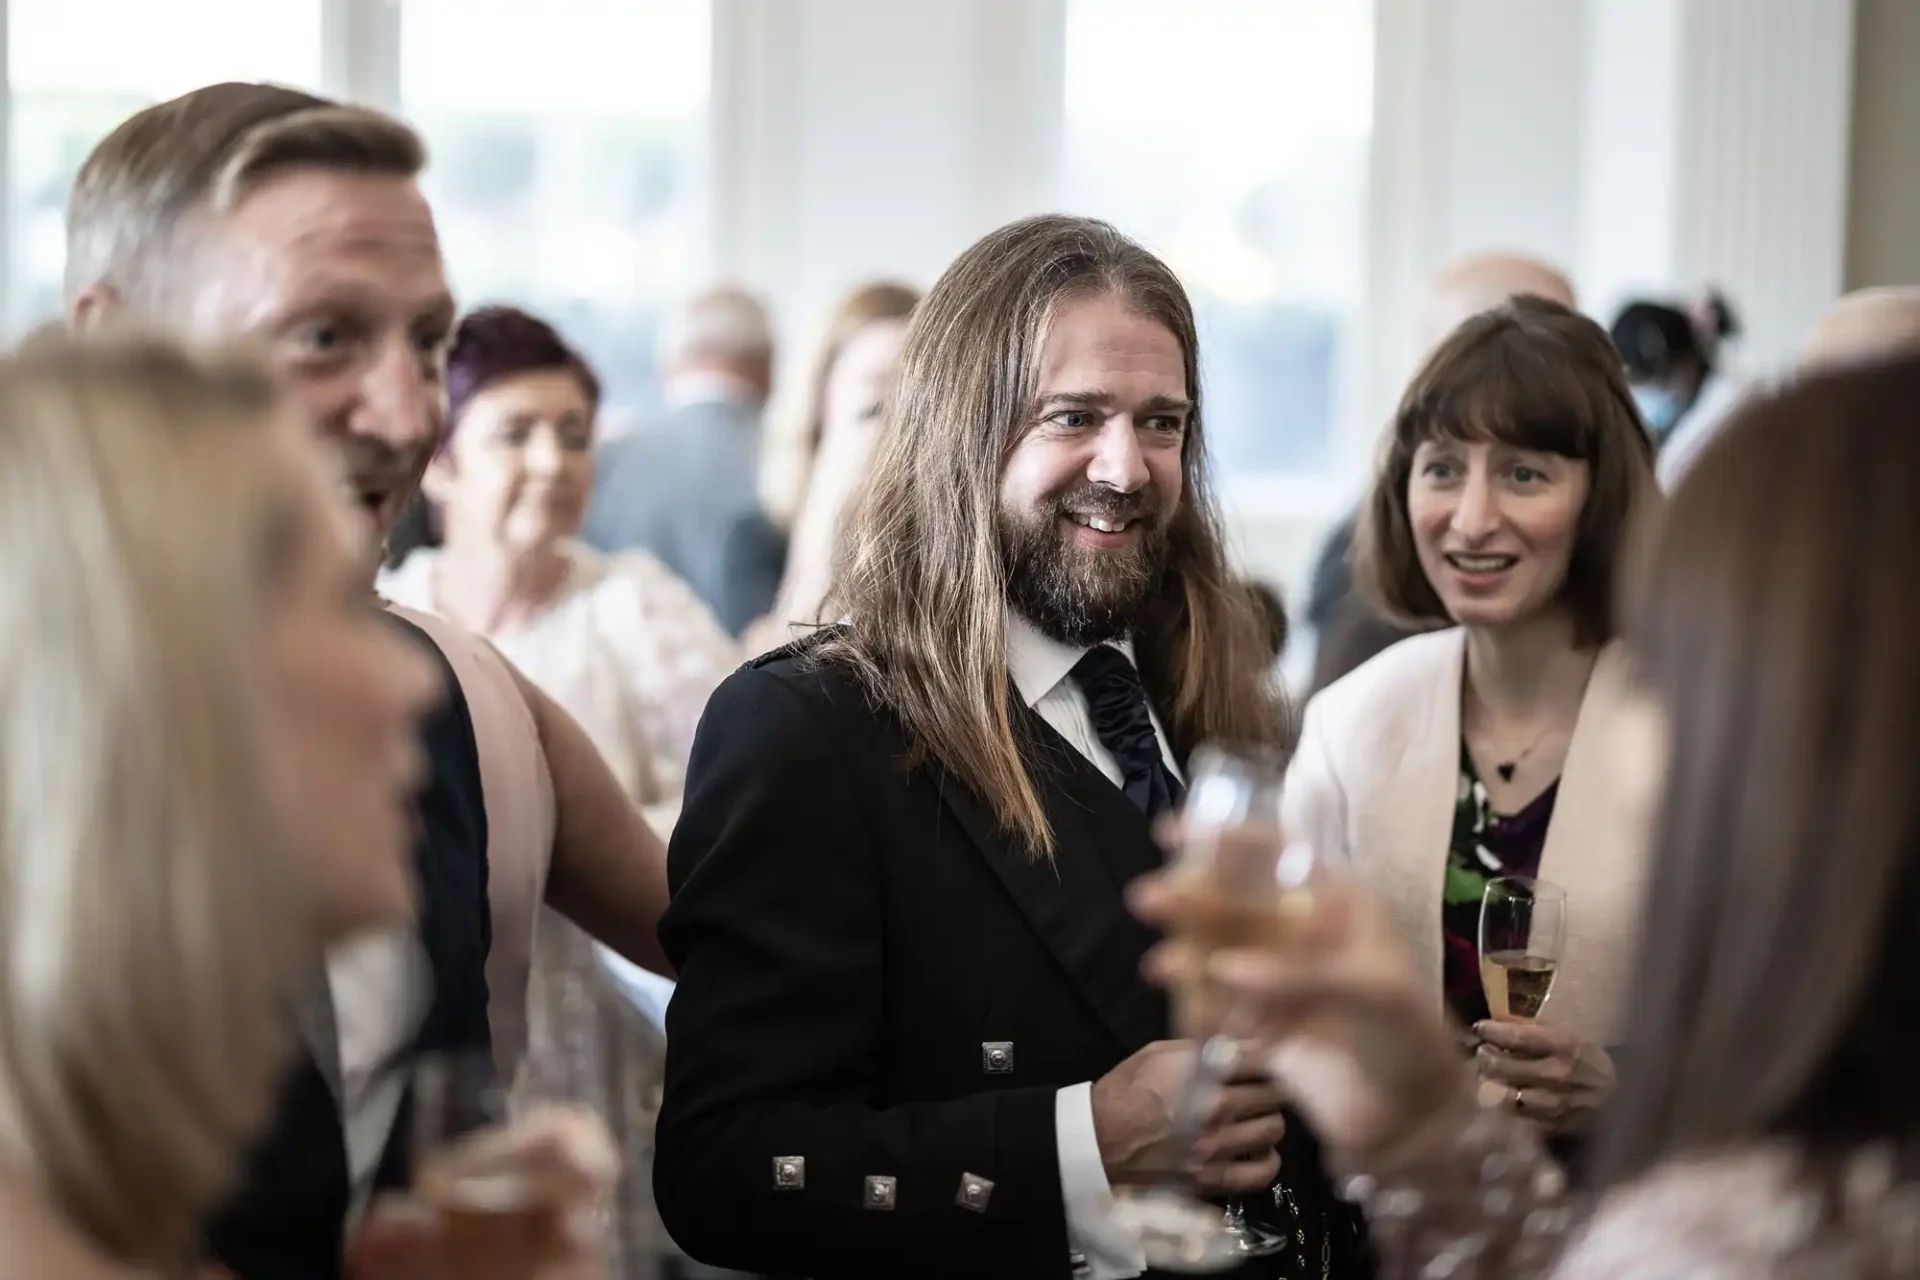 A man with long hair smiling and holding a champagne glass at a social event, surrounded by guests engaged in conversations.